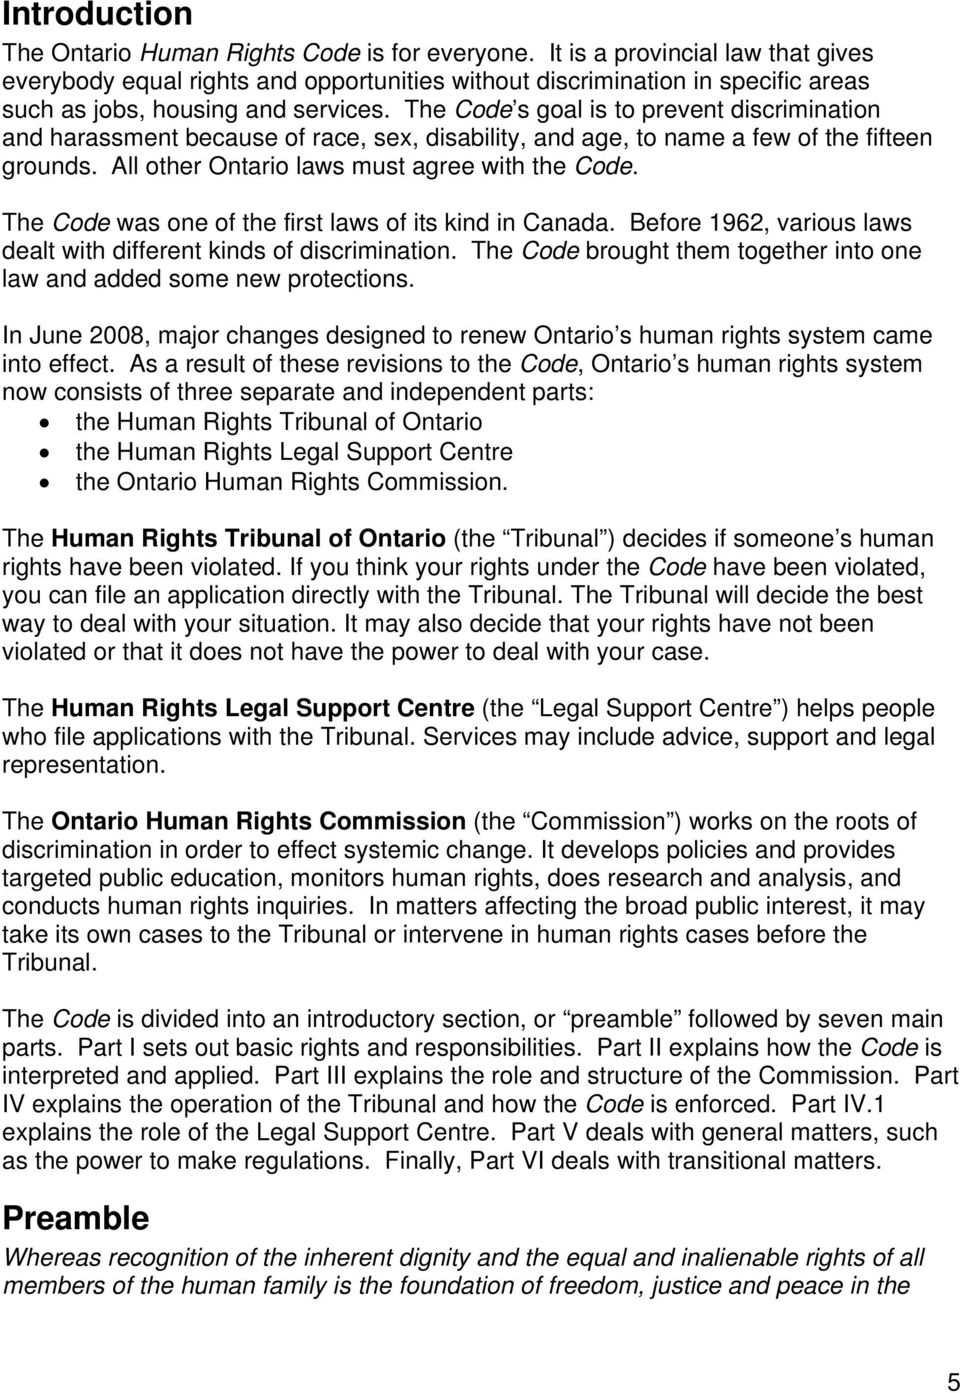 The Code s goal is to prevent discrimination and harassment because of race, sex, disability, and age, to name a few of the fifteen grounds. All other Ontario laws must agree with the Code.